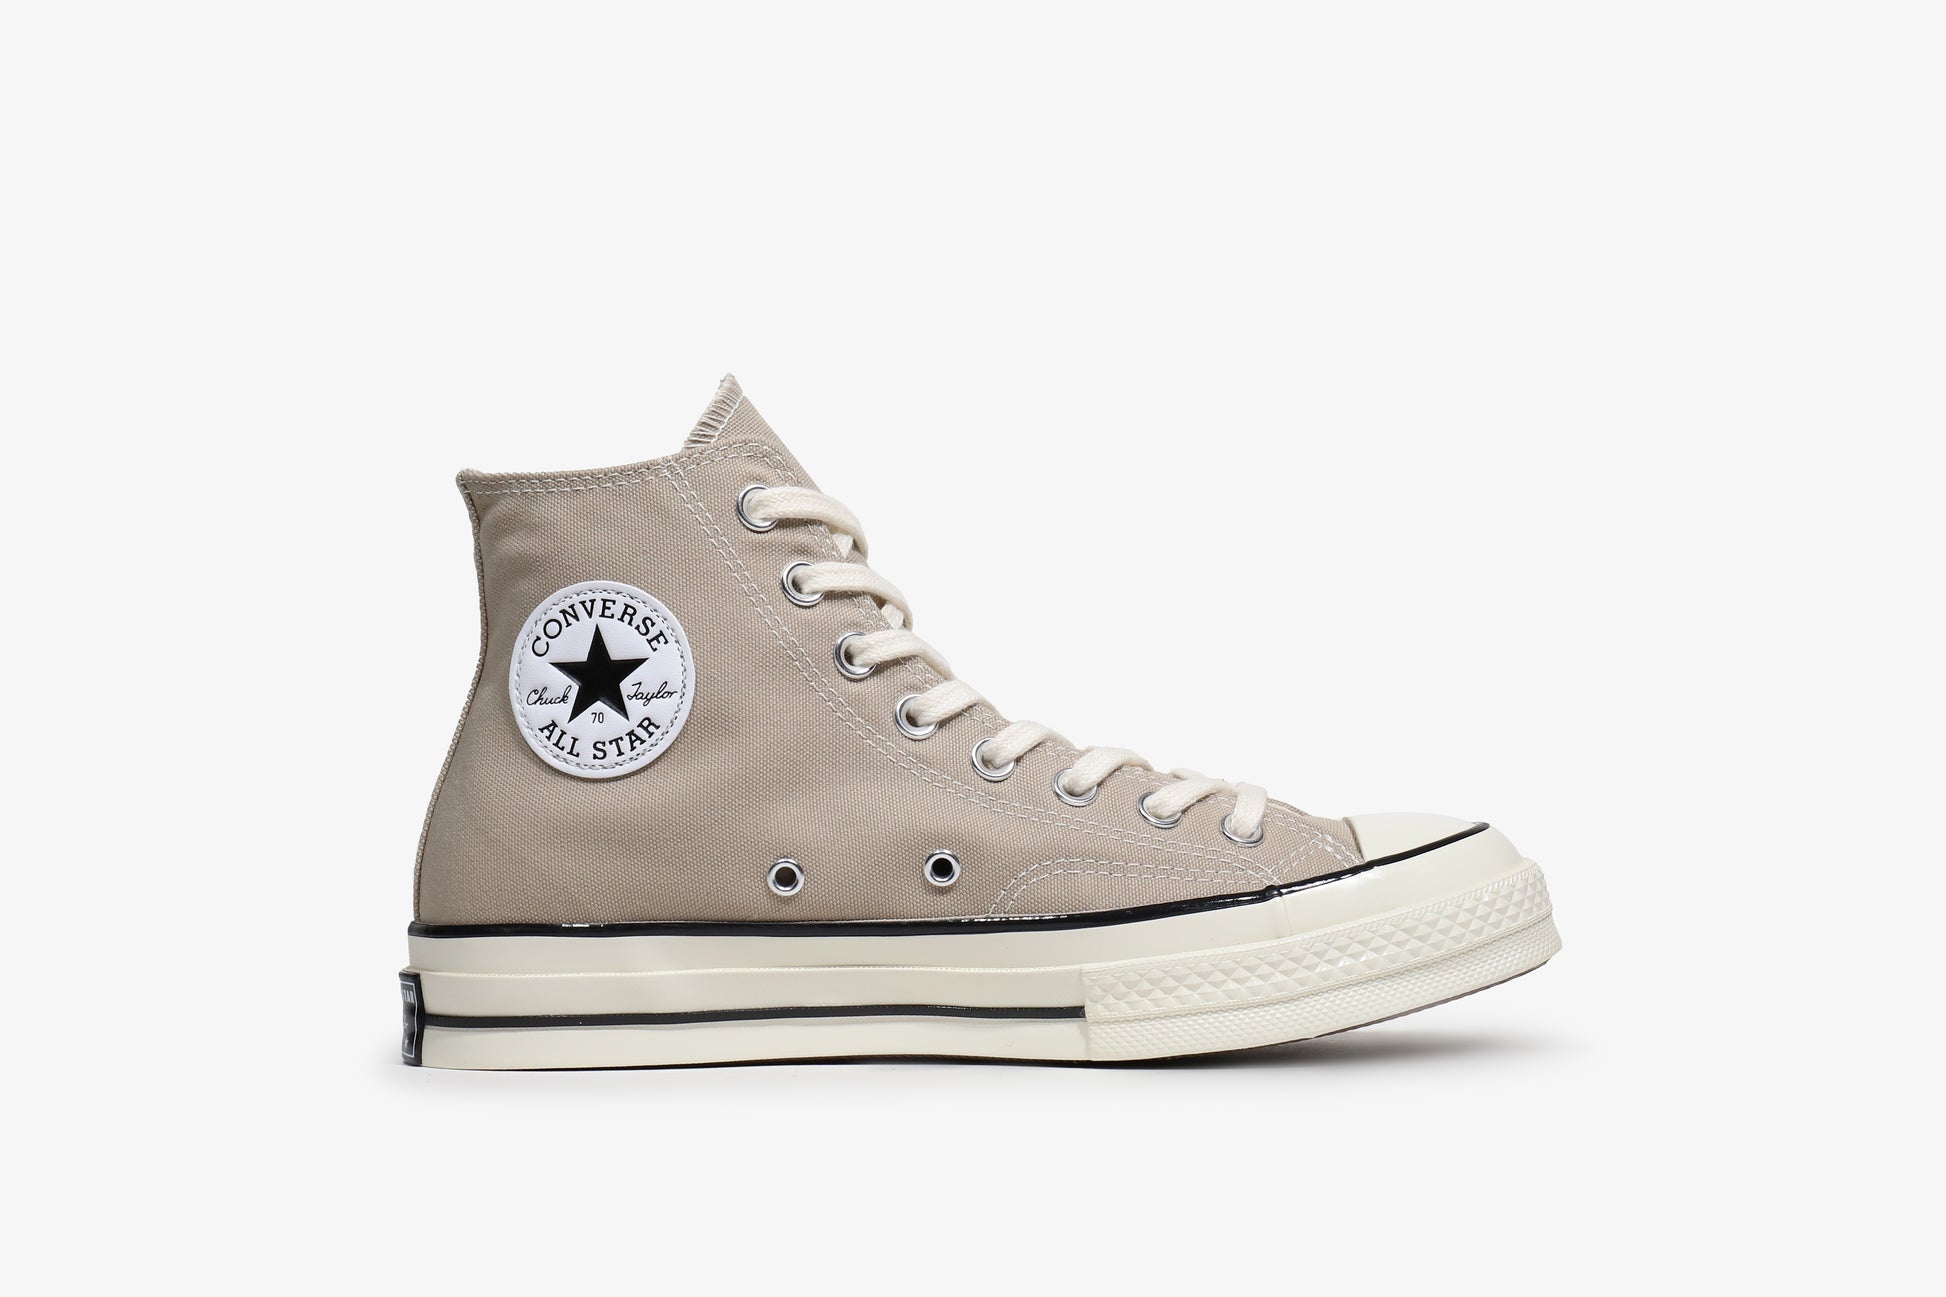 Standard dukke Ged converse pro leather vintage white green amarillo